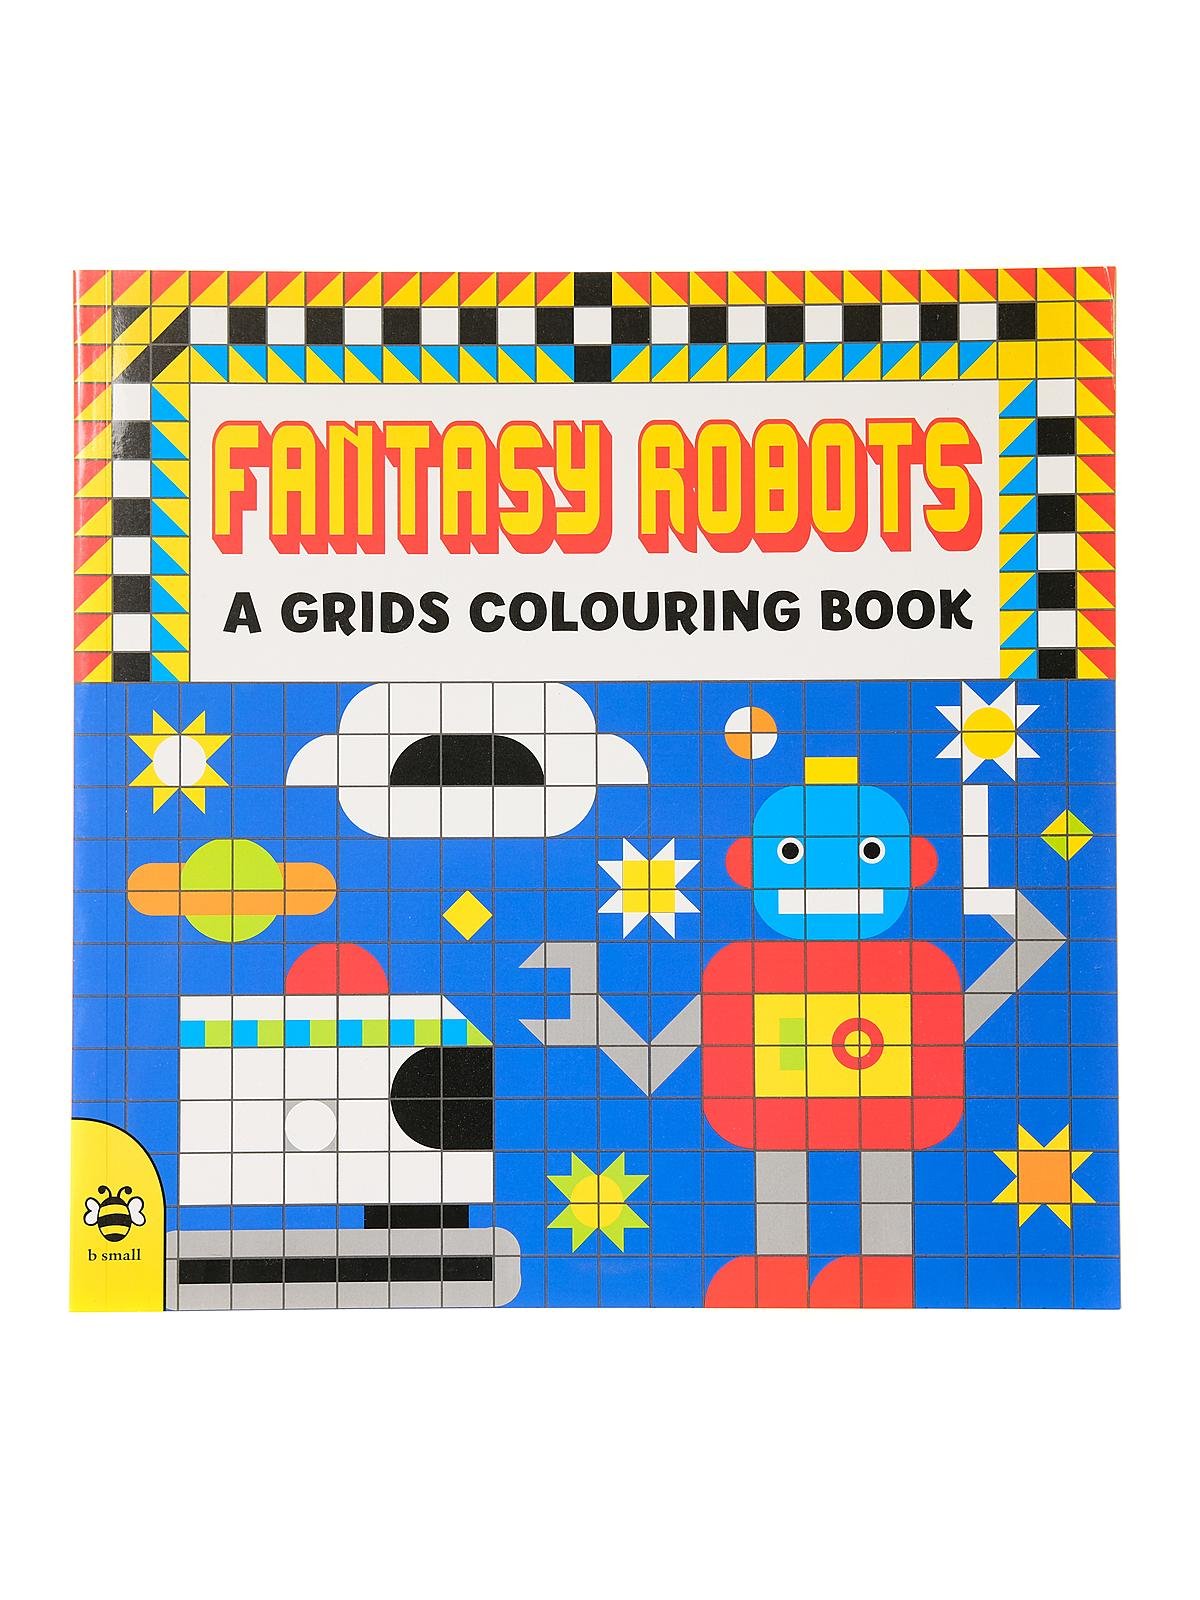 b small publishing - A Grids Colouring Book